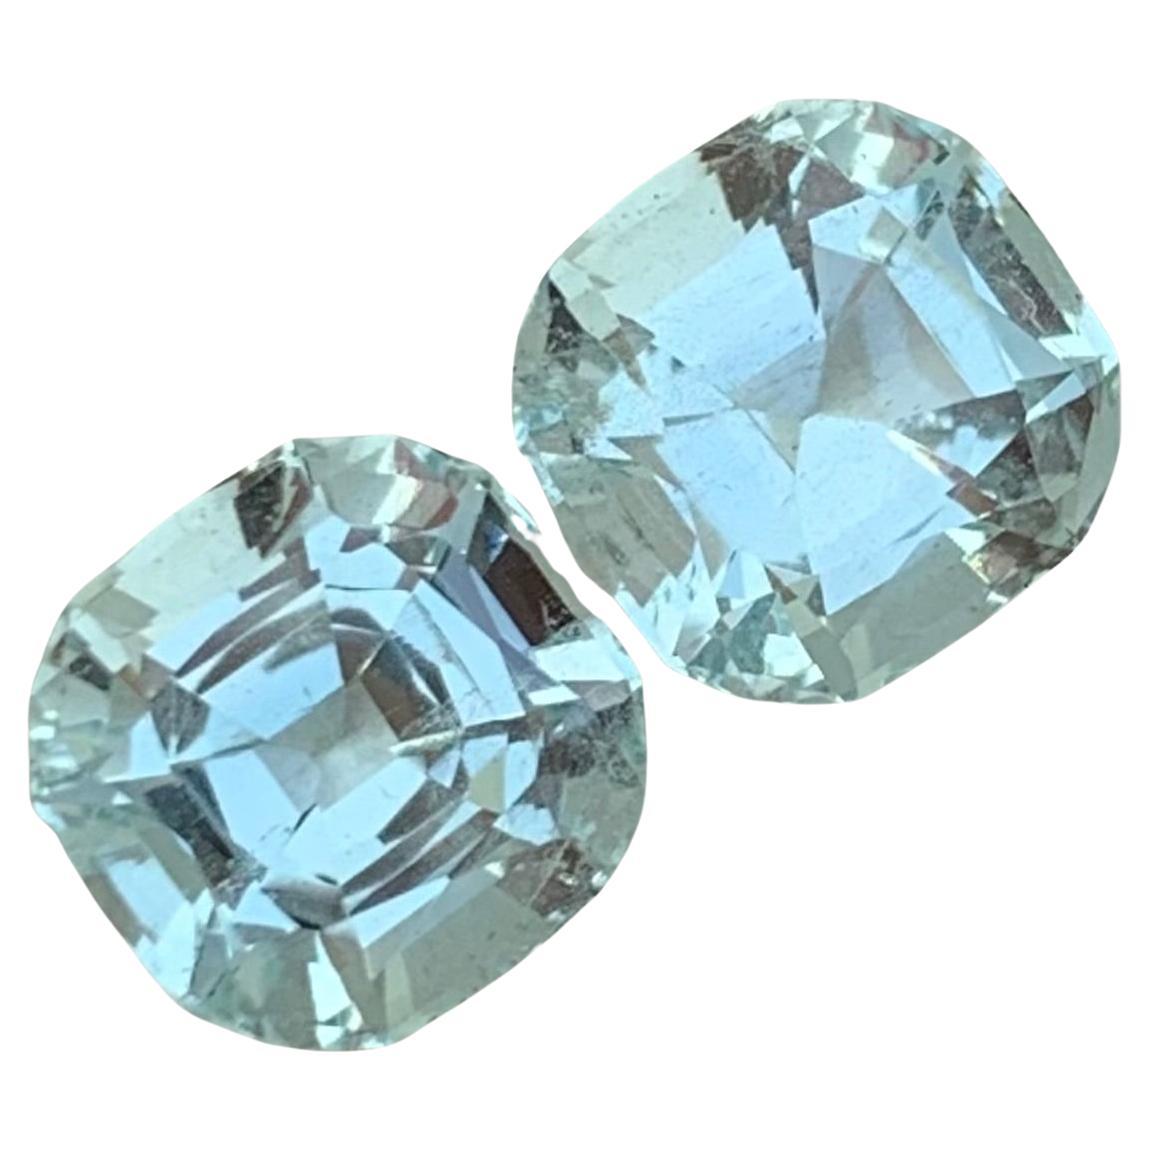 4.95 Carats Natural Loose Slightly Included Aquamarine Pair For Earrings 